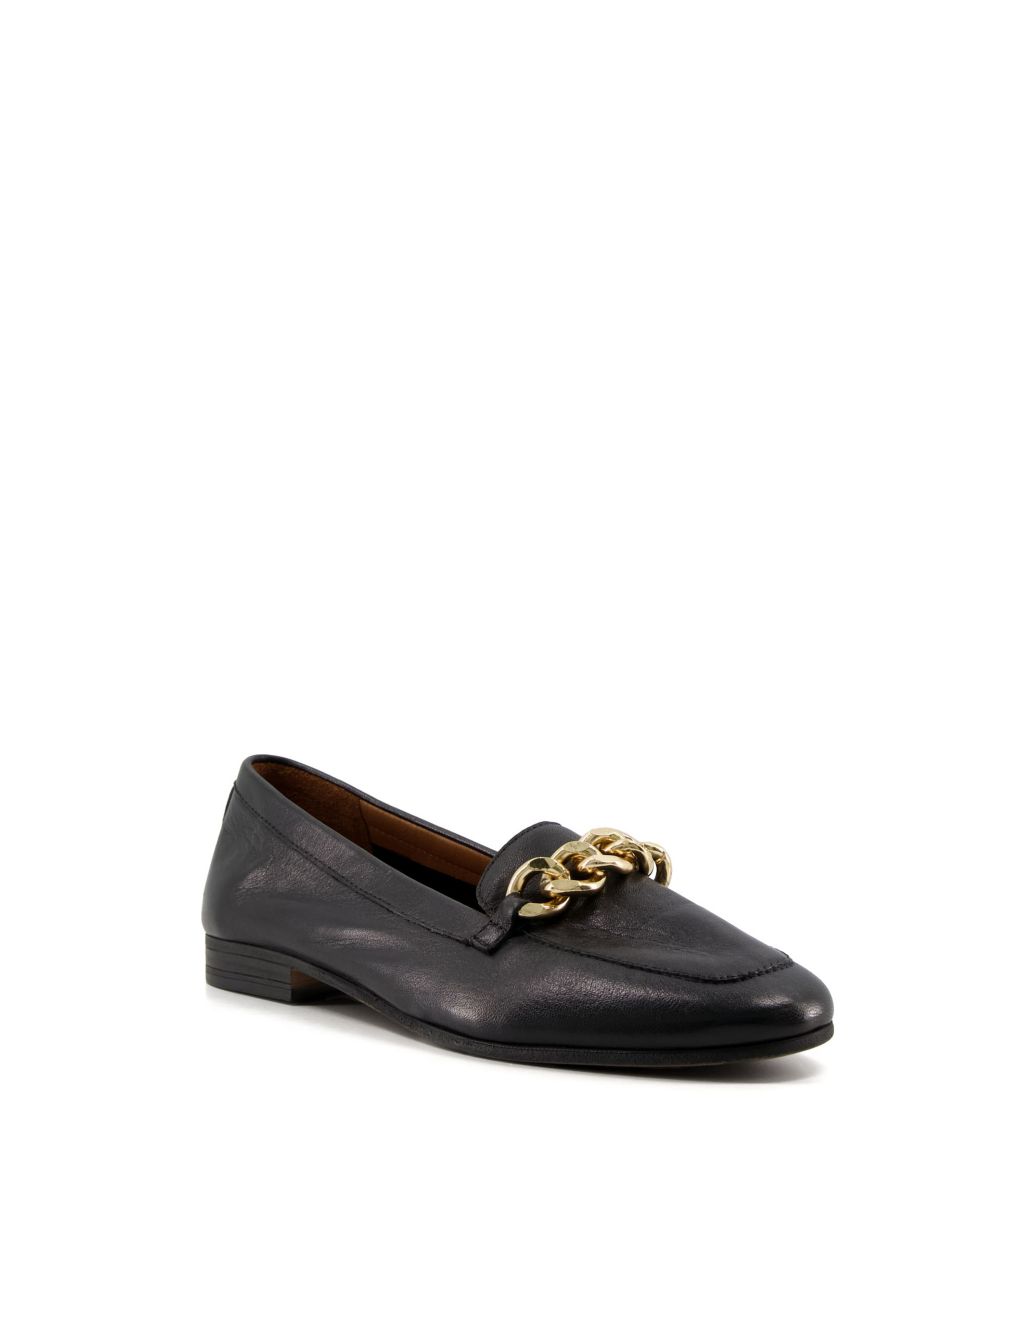 Leather Chain Detail Flat Loafers image 3